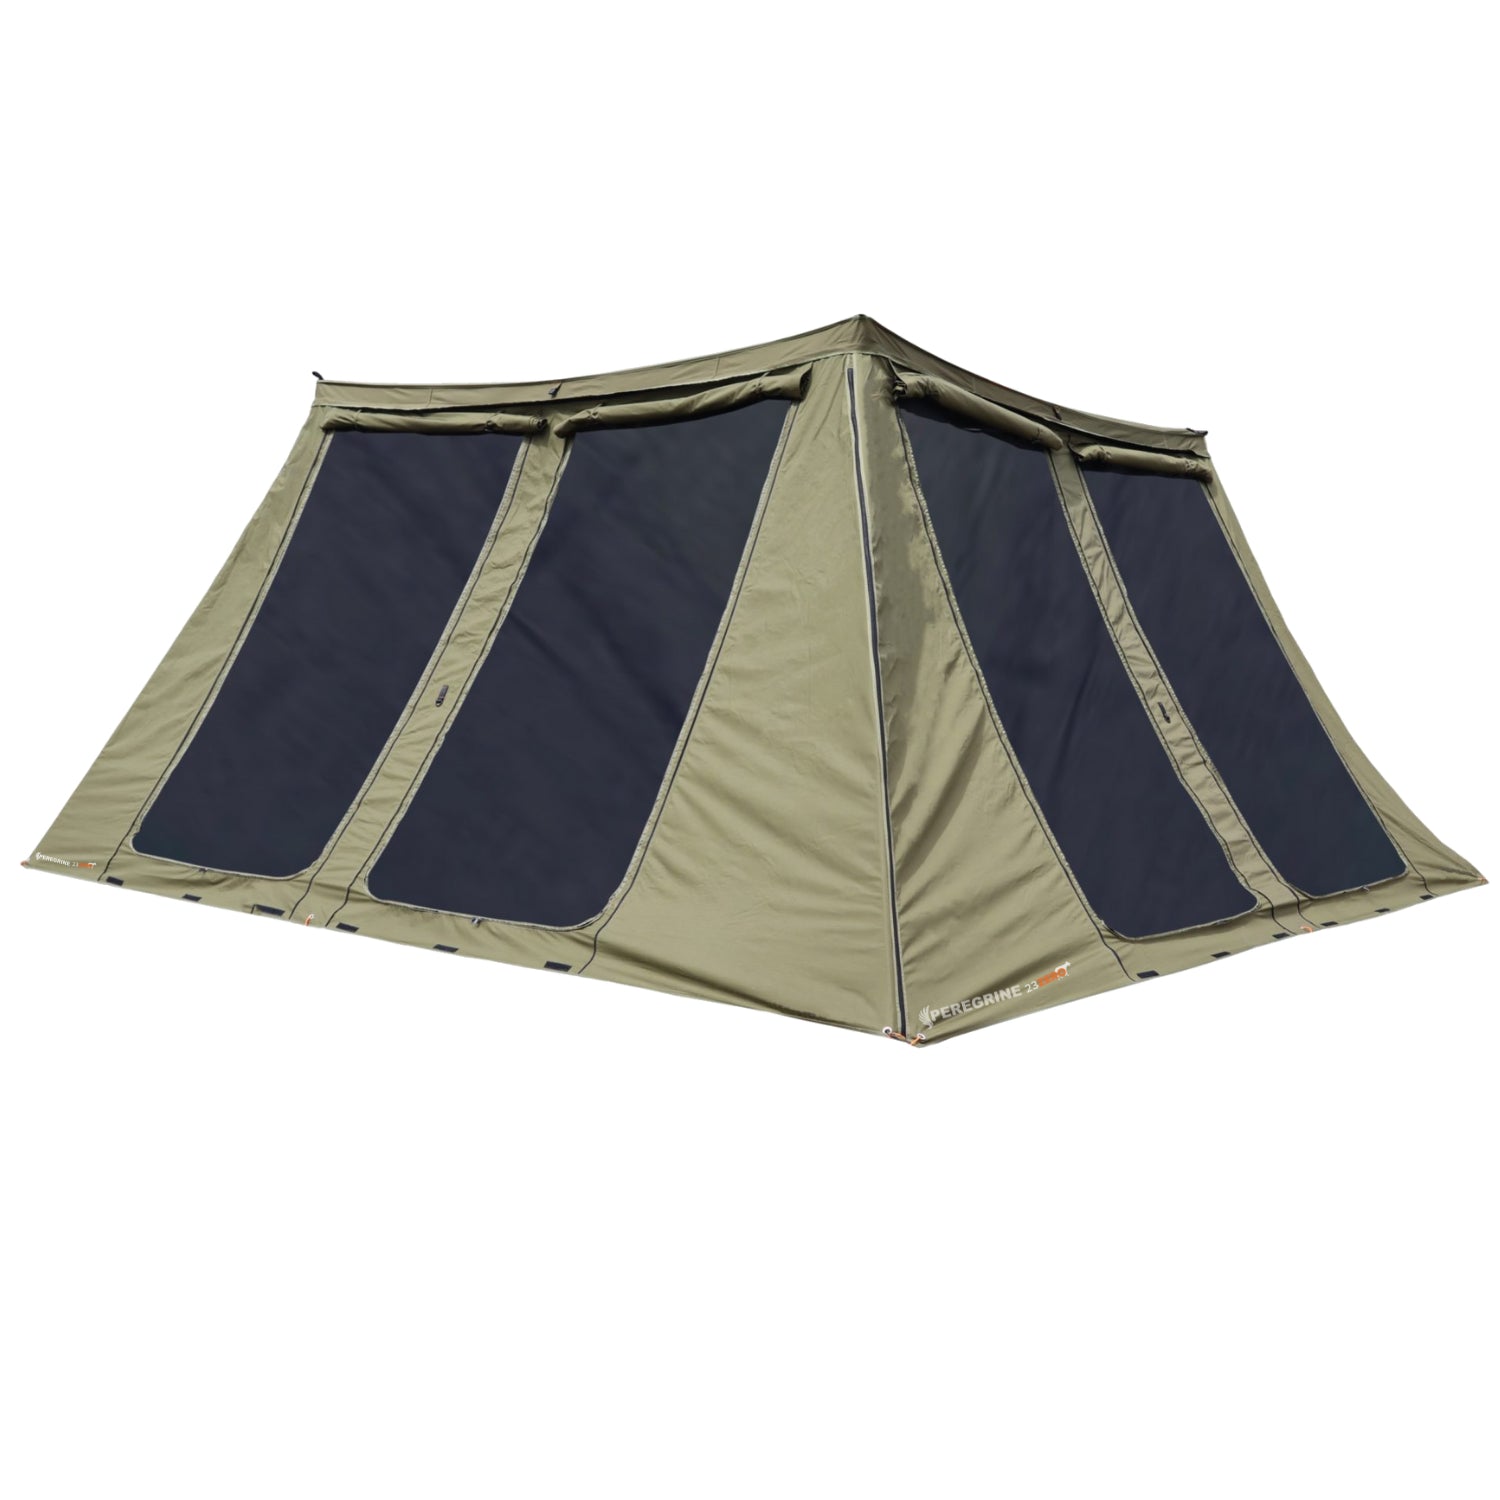 23zero-peregrine-2-0-deluxe-270-degree-right-awning-wall-2-with-screen